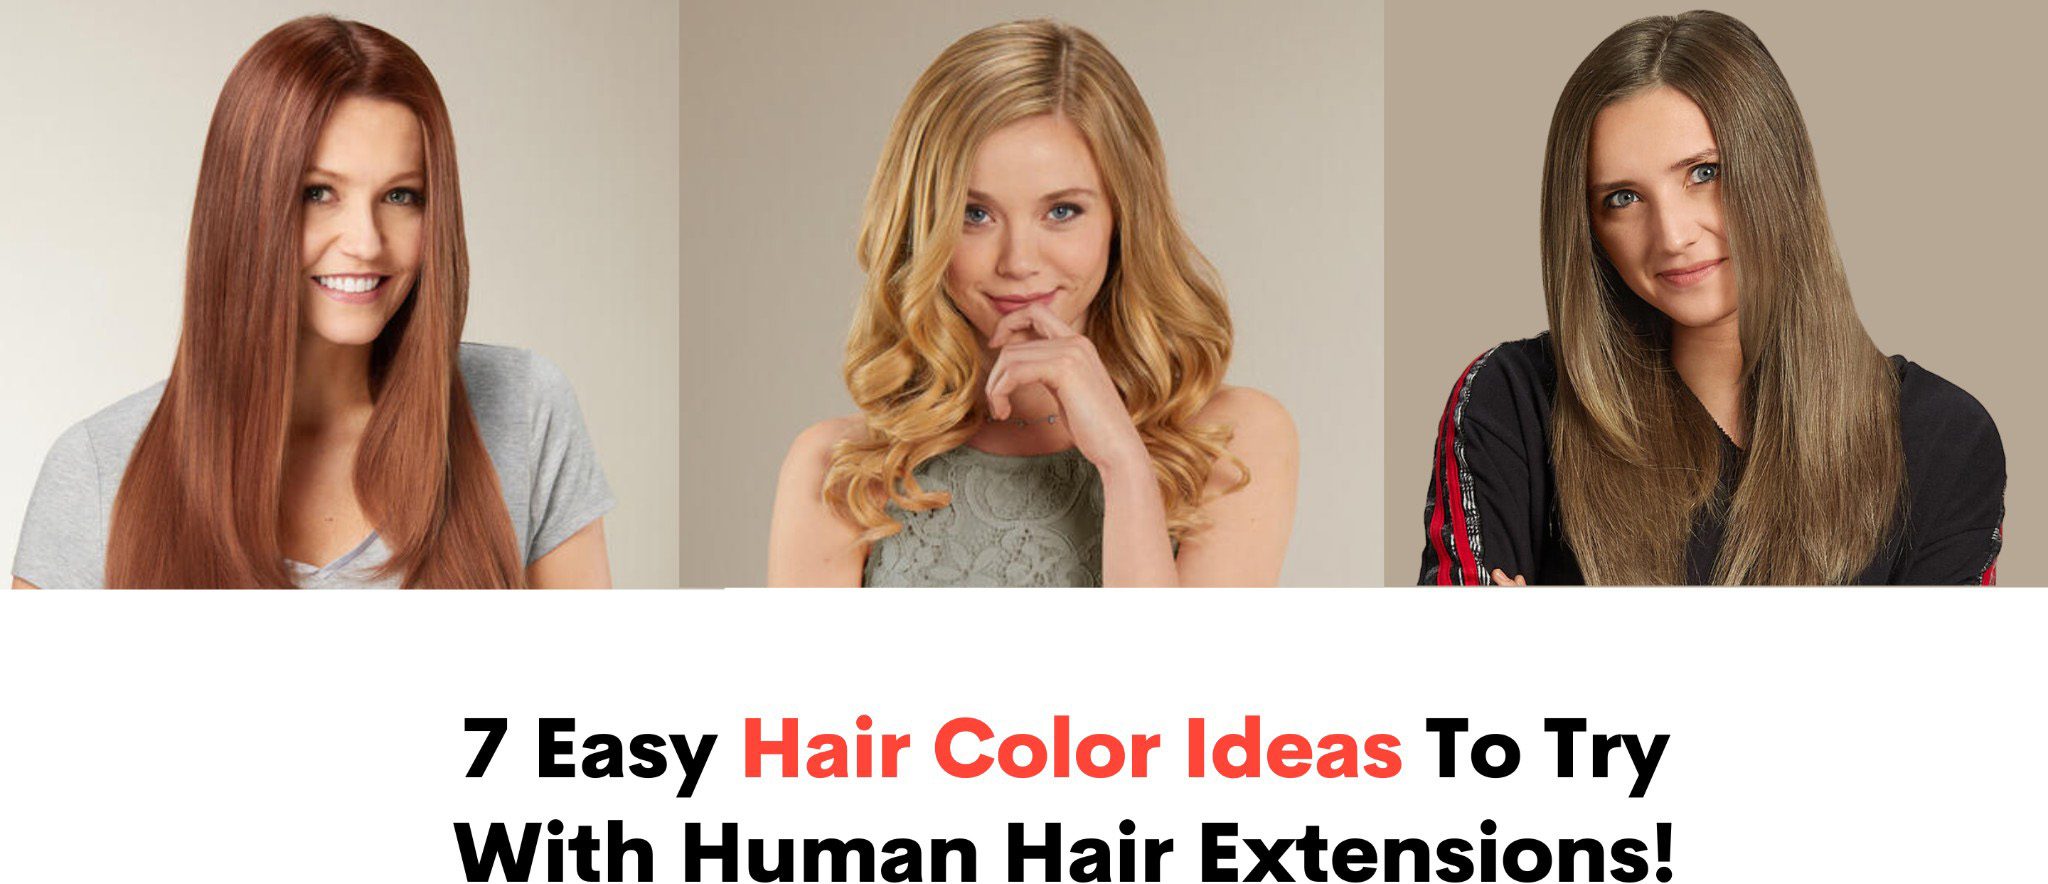 7 Hair Color Ideas to Try With Human Hair Extensions